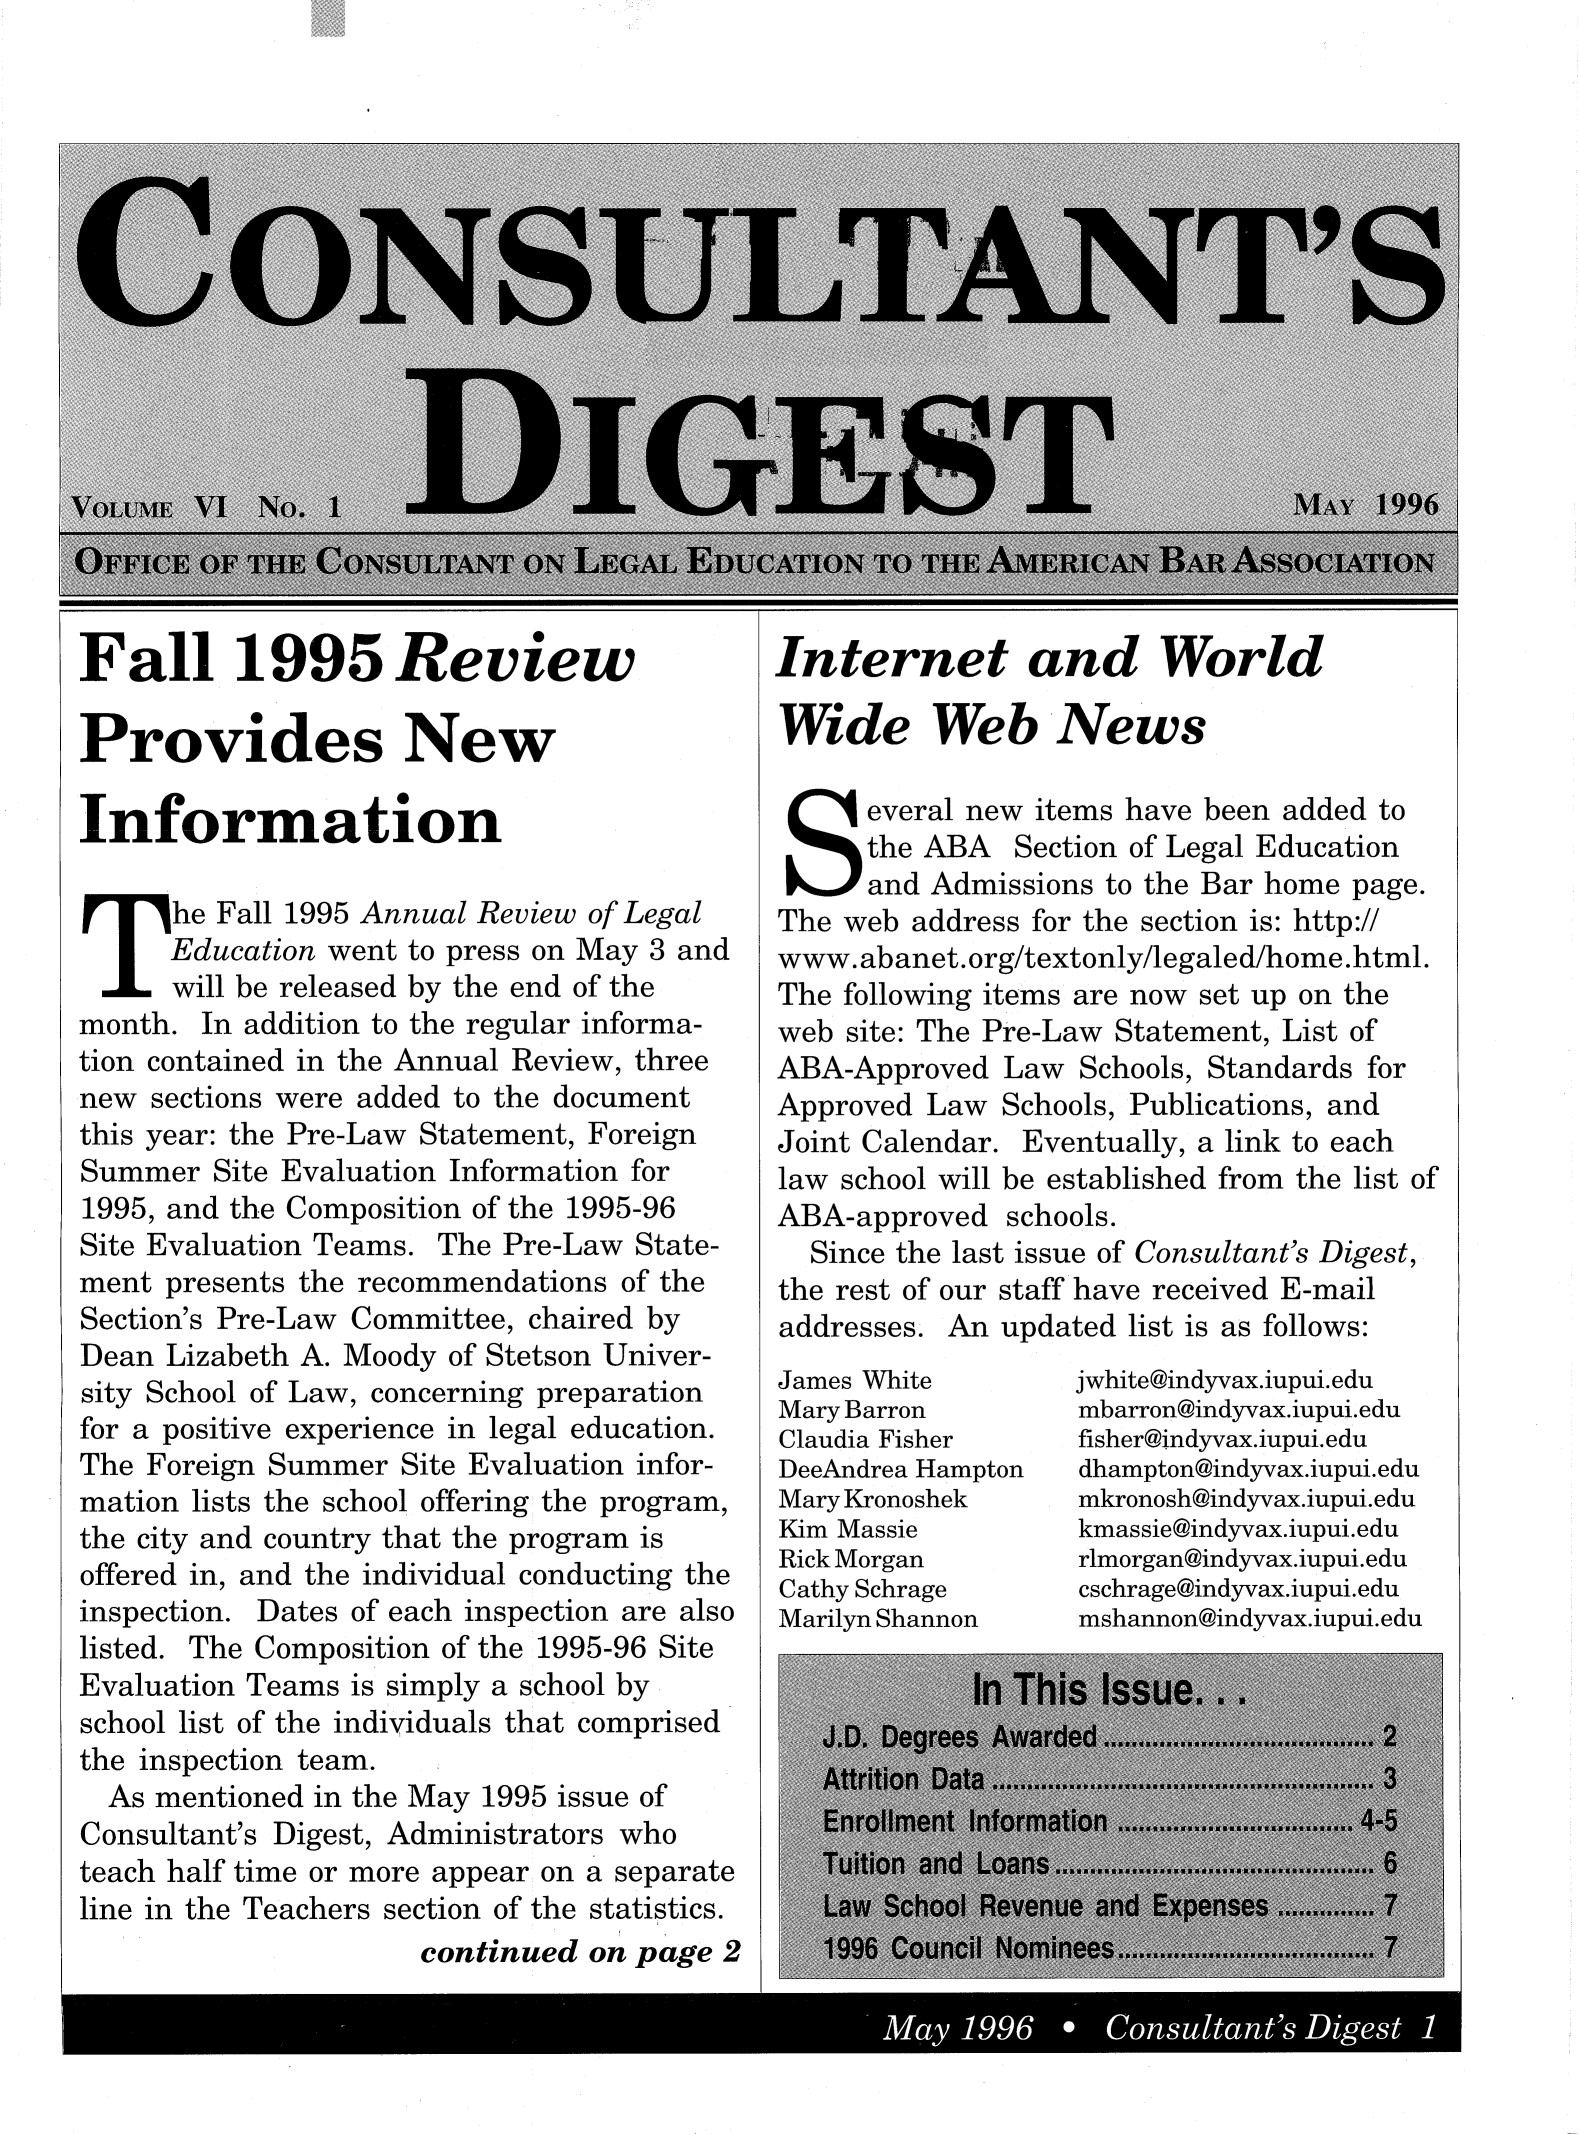 handle is hein.journals/cnsldig6 and id is 1 raw text is: Fall 1995 Review
Provides New
In formation
he Fall 1995 Annual Review of Legal
Education went to press on May 3 and
will be released by the end of the
month. In addition to the regular informa-
tion contained in the Annual Review, three
new sections were added to the document
this year: the Pre-Law Statement, Foreign
Summer Site Evaluation Information for
1995, and the Composition of the 1995-96
Site Evaluation Teams. The Pre-Law State-
ment presents the recommendations of the
Section's Pre-Law Committee, chaired by
Dean Lizabeth A. Moody of Stetson Univer-
sity School of Law, concerning preparation
for a positive experience in legal education.
The Foreign Summer Site Evaluation infor-
mation lists the school offering the program,
the city and country that the program is
offered in, and the individual conducting the
inspection. Dates of each inspection are also
listed. The Composition of the 1995-96 Site
Evaluation Teams is simply a school by
school list of the individuals that comprised
the inspection team.
As mentioned in the May 1995 issue of
Consultant's Digest, Administrators who
teach half time or more appear on a separate
line in the Teachers section of the statistics.
continued on page 2

Internet and World
Wide Web News
Several new items have been added to
the ABA Section of Legal Education
and Admissions to the Bar home page.
The web address for the section is: http://
www.abanet.org/textonly/legaled/home.html.
The following items are now set up on the
web site: The Pre-Law Statement, List of
ABA-Approved Law Schools, Standards for
Approved Law Schools, Publications, and
Joint Calendar. Eventually, a link to each
law school will be established from the list of
ABA-approved schools.
Since the last issue of Consultant's Digest,
the rest of our staff have received E-mail
addresses. An updated list is as follows:

James White
Mary Barron
Claudia Fisher
DeeAndrea Hampton
Mary Kronoshek
Kim Massie
Rick Morgan
Cathy Schrage
Marilyn Shannon

jwhite@indyvax.iupui.edu
mbarron@indyvax.iupui.edu
fisher@indyvax.iupui.edu
dhampton@indyvax.iupui.edu
mkronosh@indyvax.iupui.edu
kmassie@indyvax.iupui.edu
rlmorgan@indyvax.iupui.edu
cschrage@indyvax.iupui.edu
mshannon@indyvax.iupui.edu

May 1996    Consultants Digest


